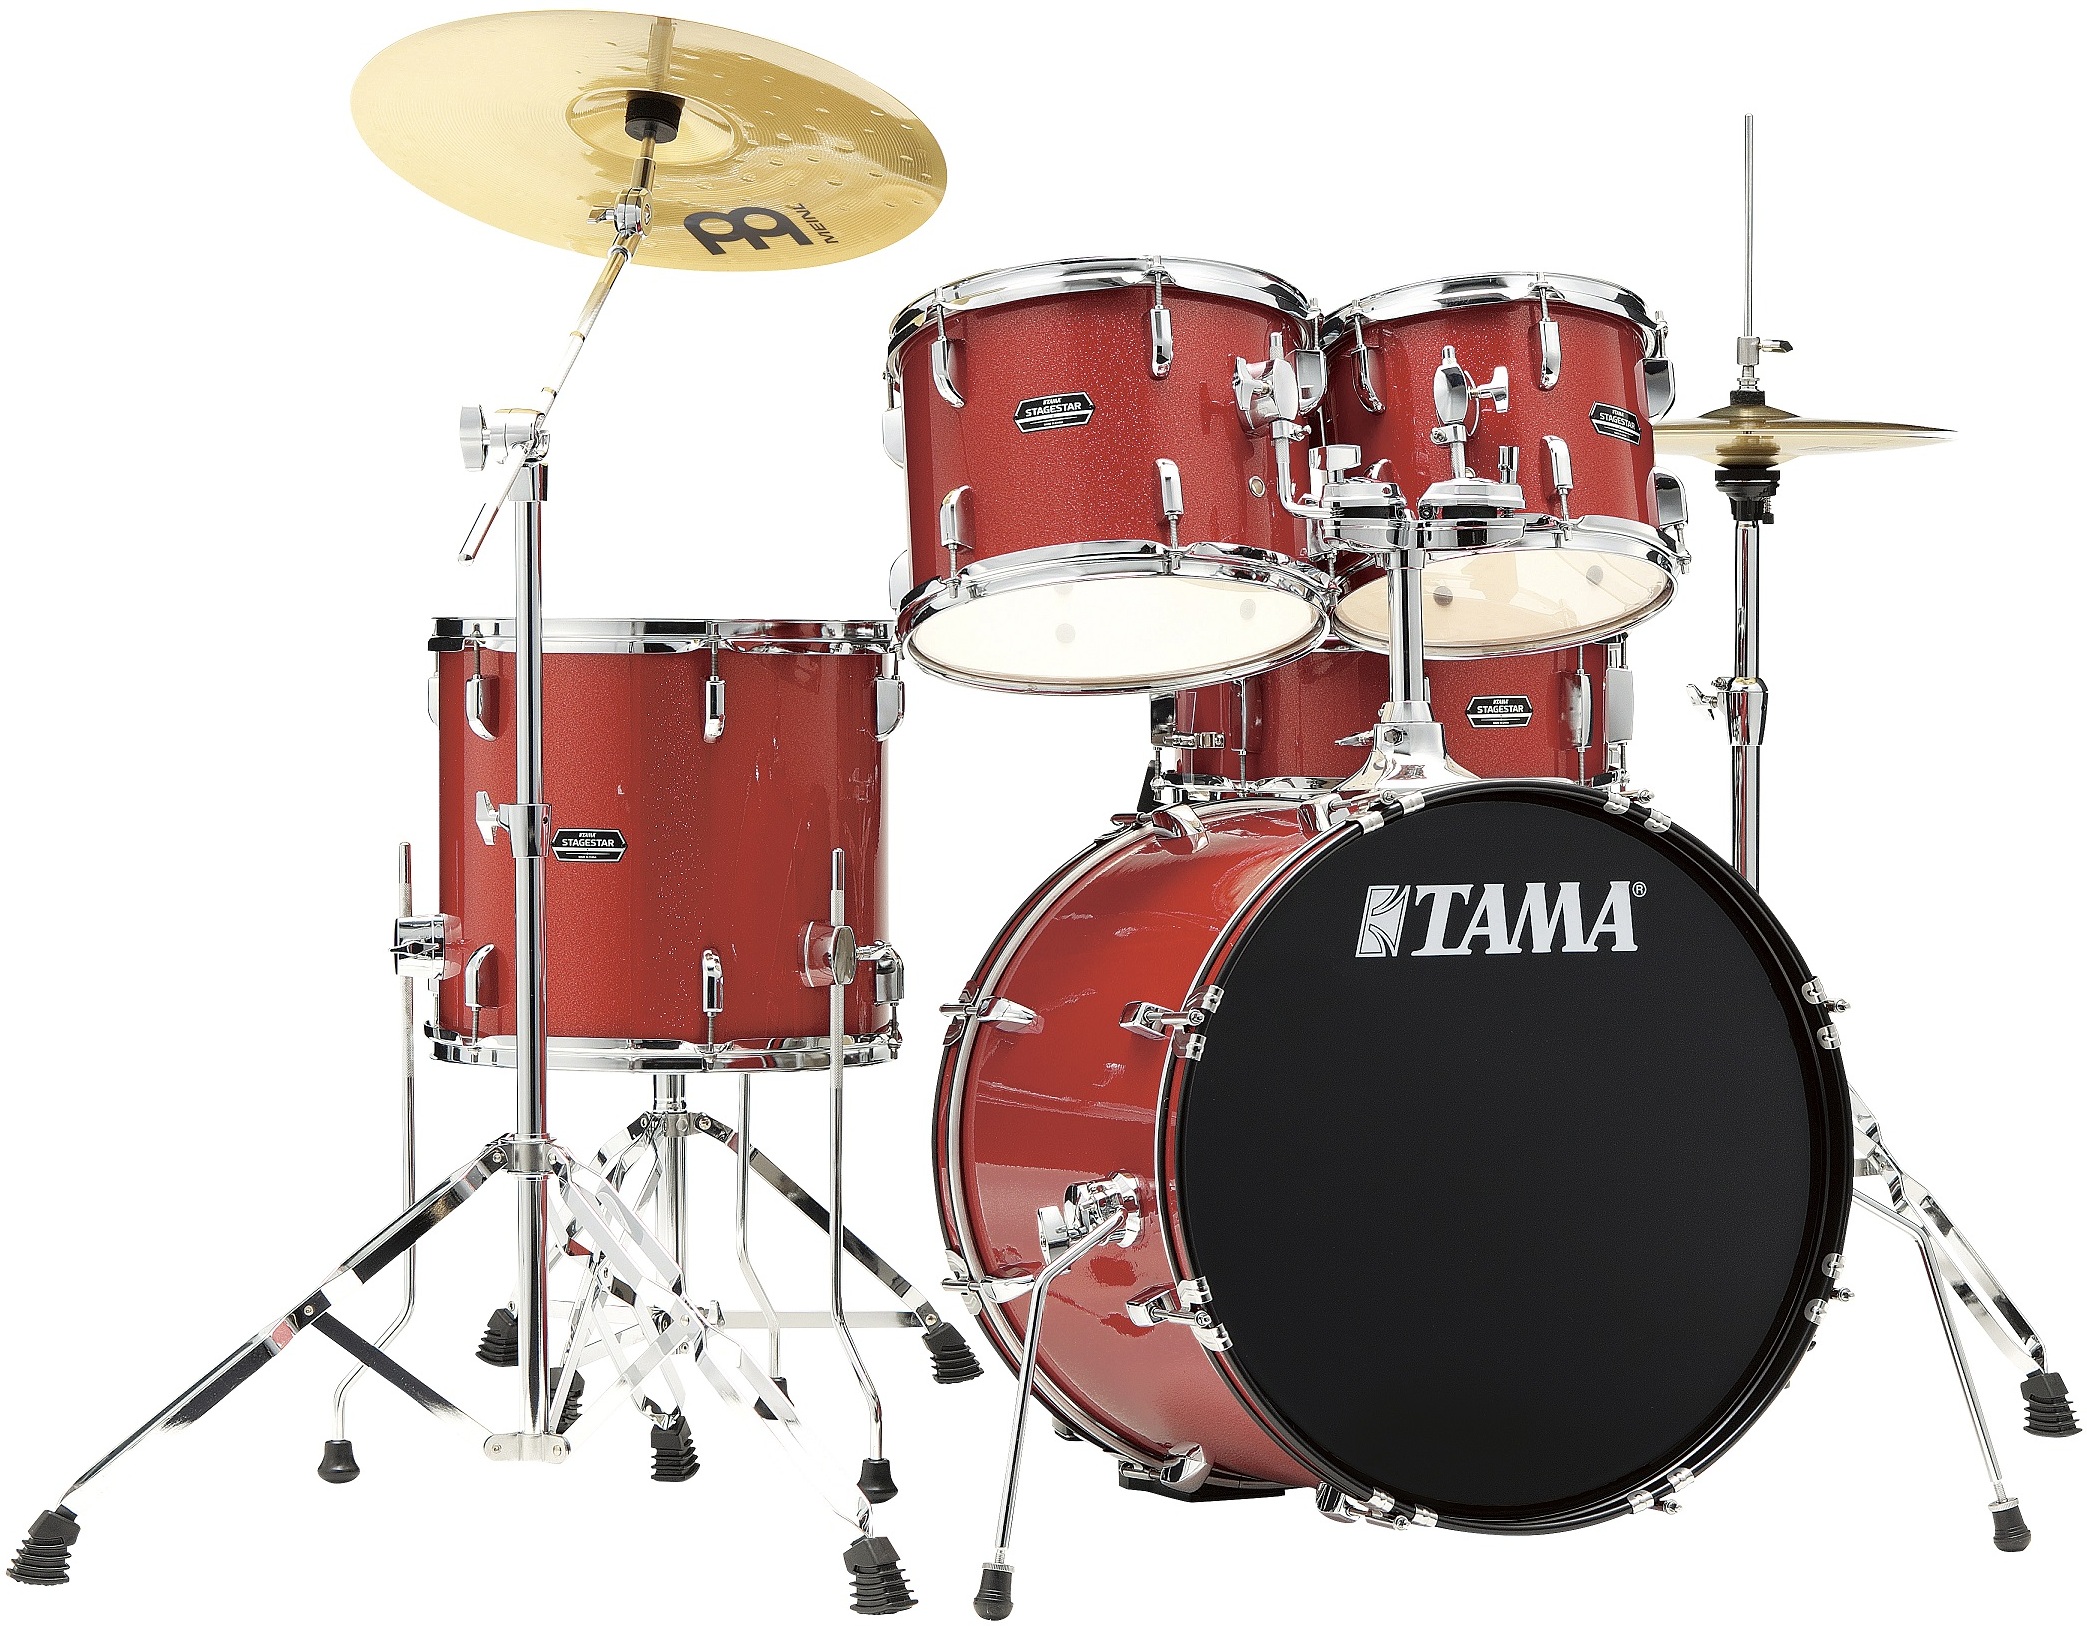 Tama Stagestar St50h5 20 Poplar Kit - Candy Red Sparkle - Batterie Acoustique Stage - Main picture